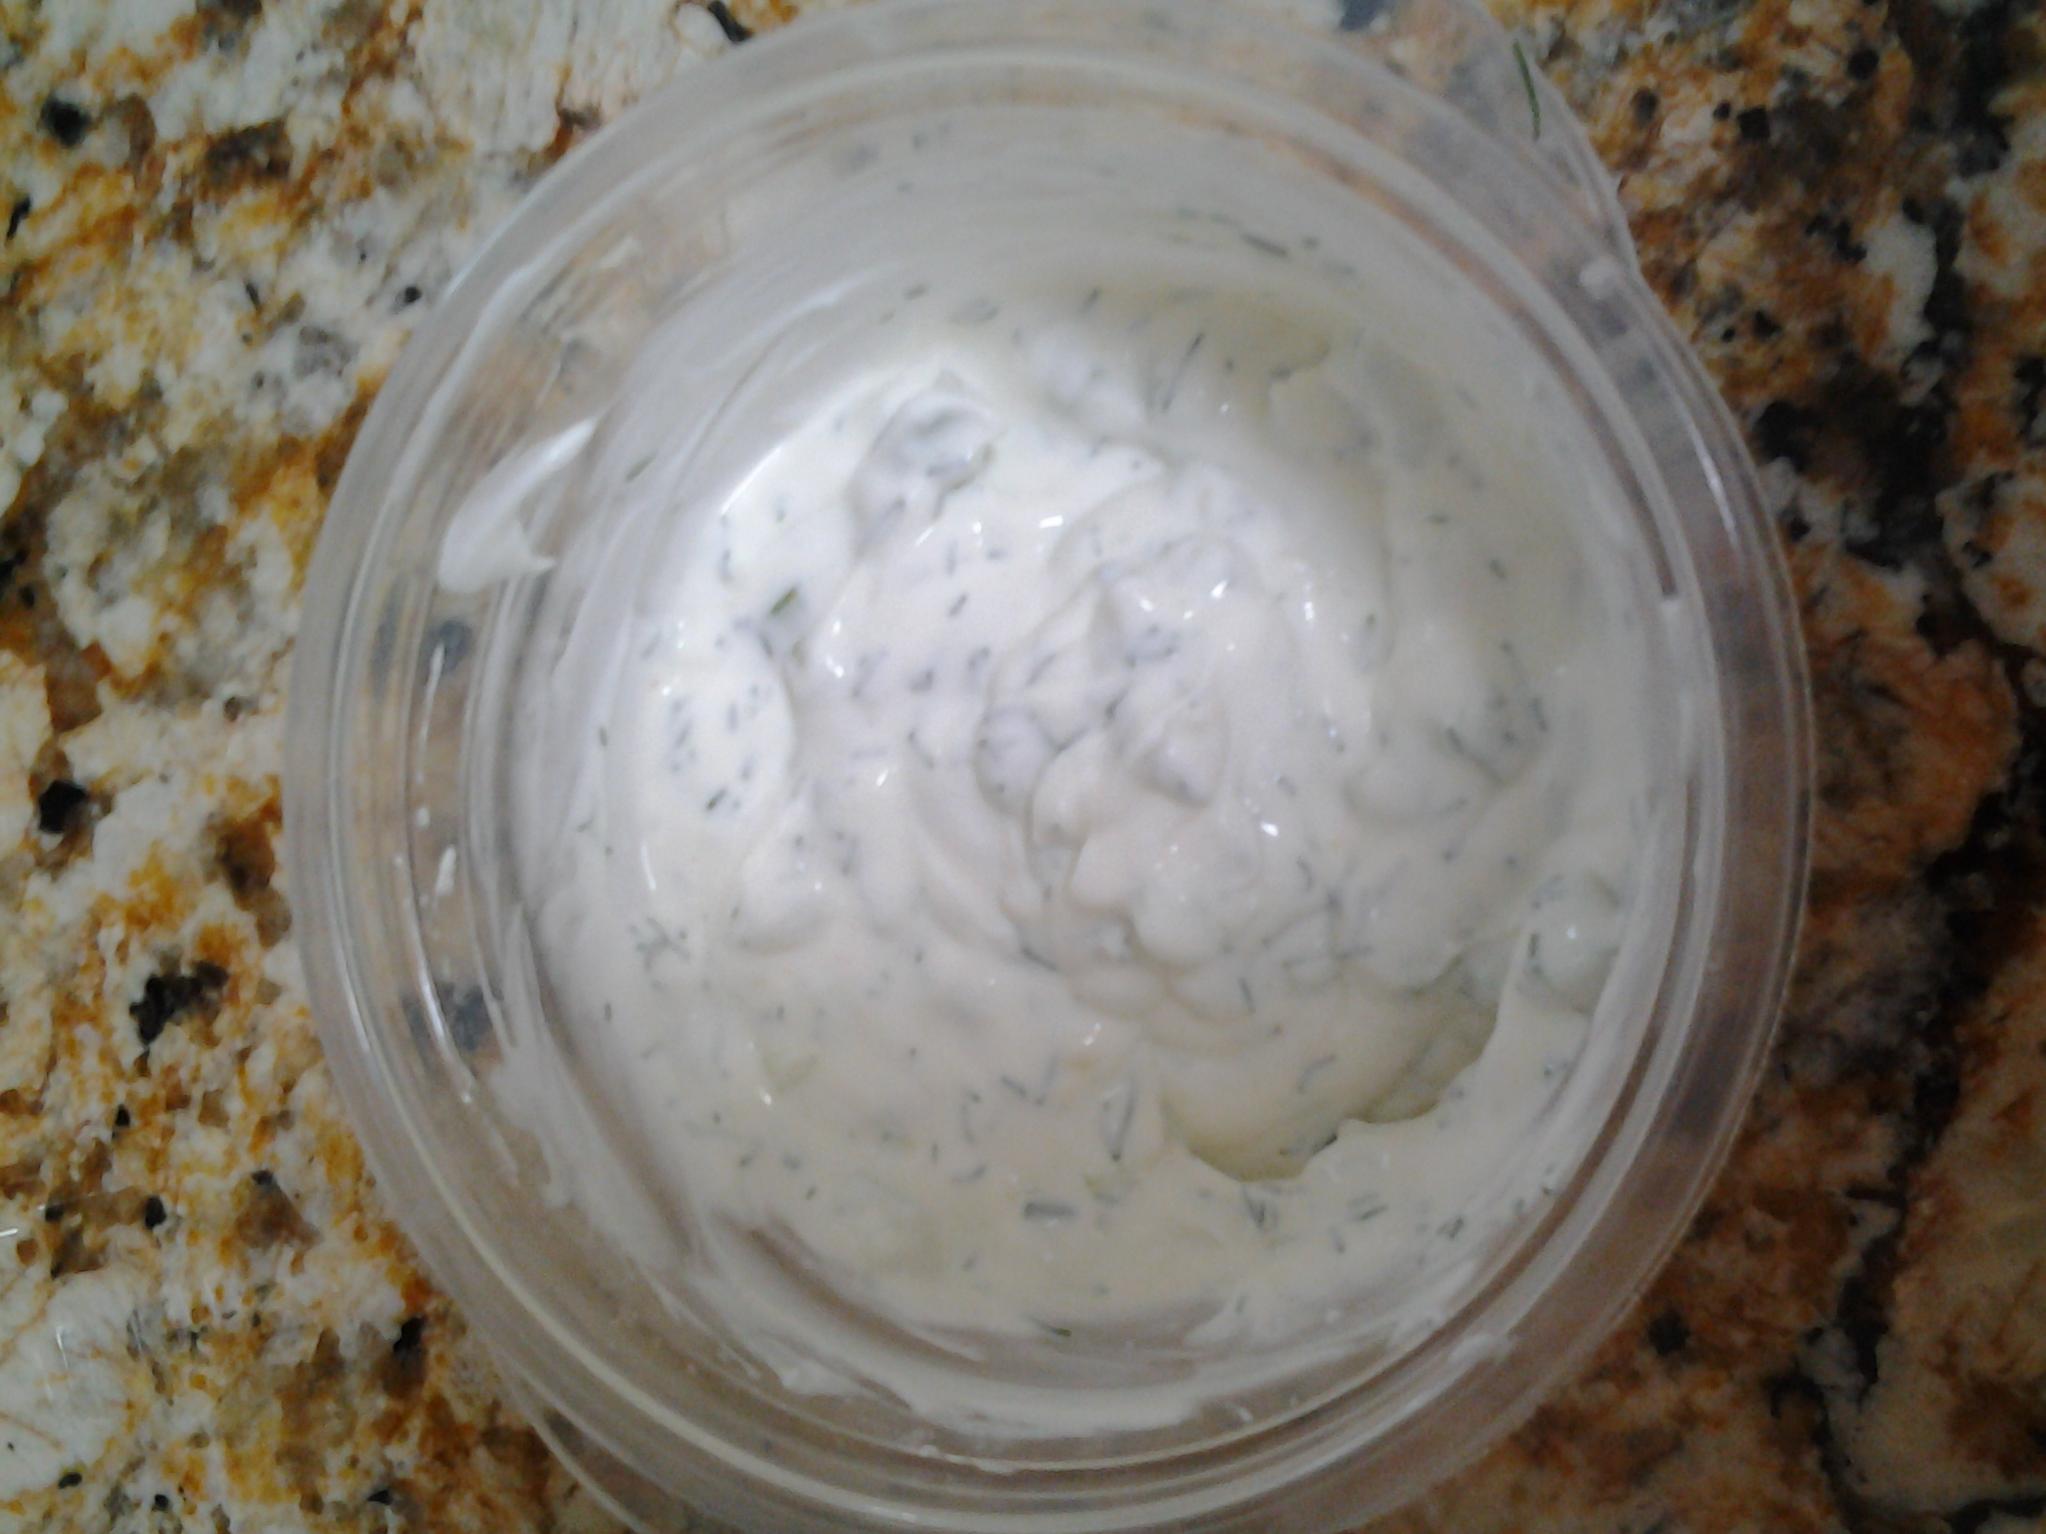  With just a few ingredients and some good mixing, you'll have a delicious tzatziki sauce.